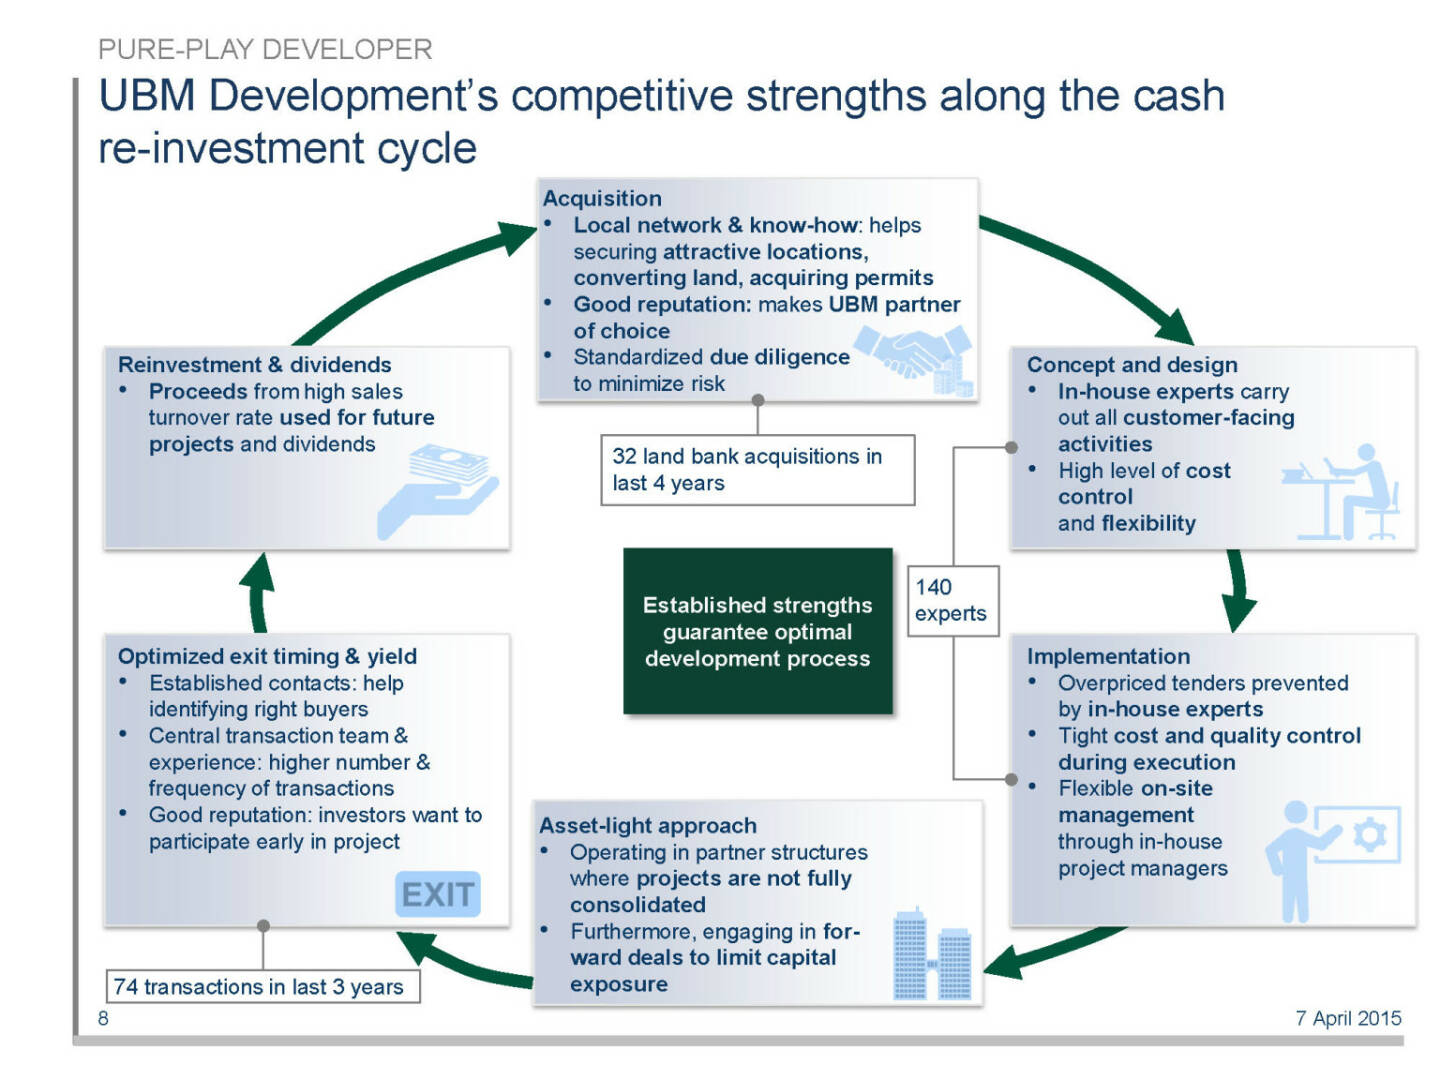 UBM Development’s competitive strengths along the cash re-investment cycle